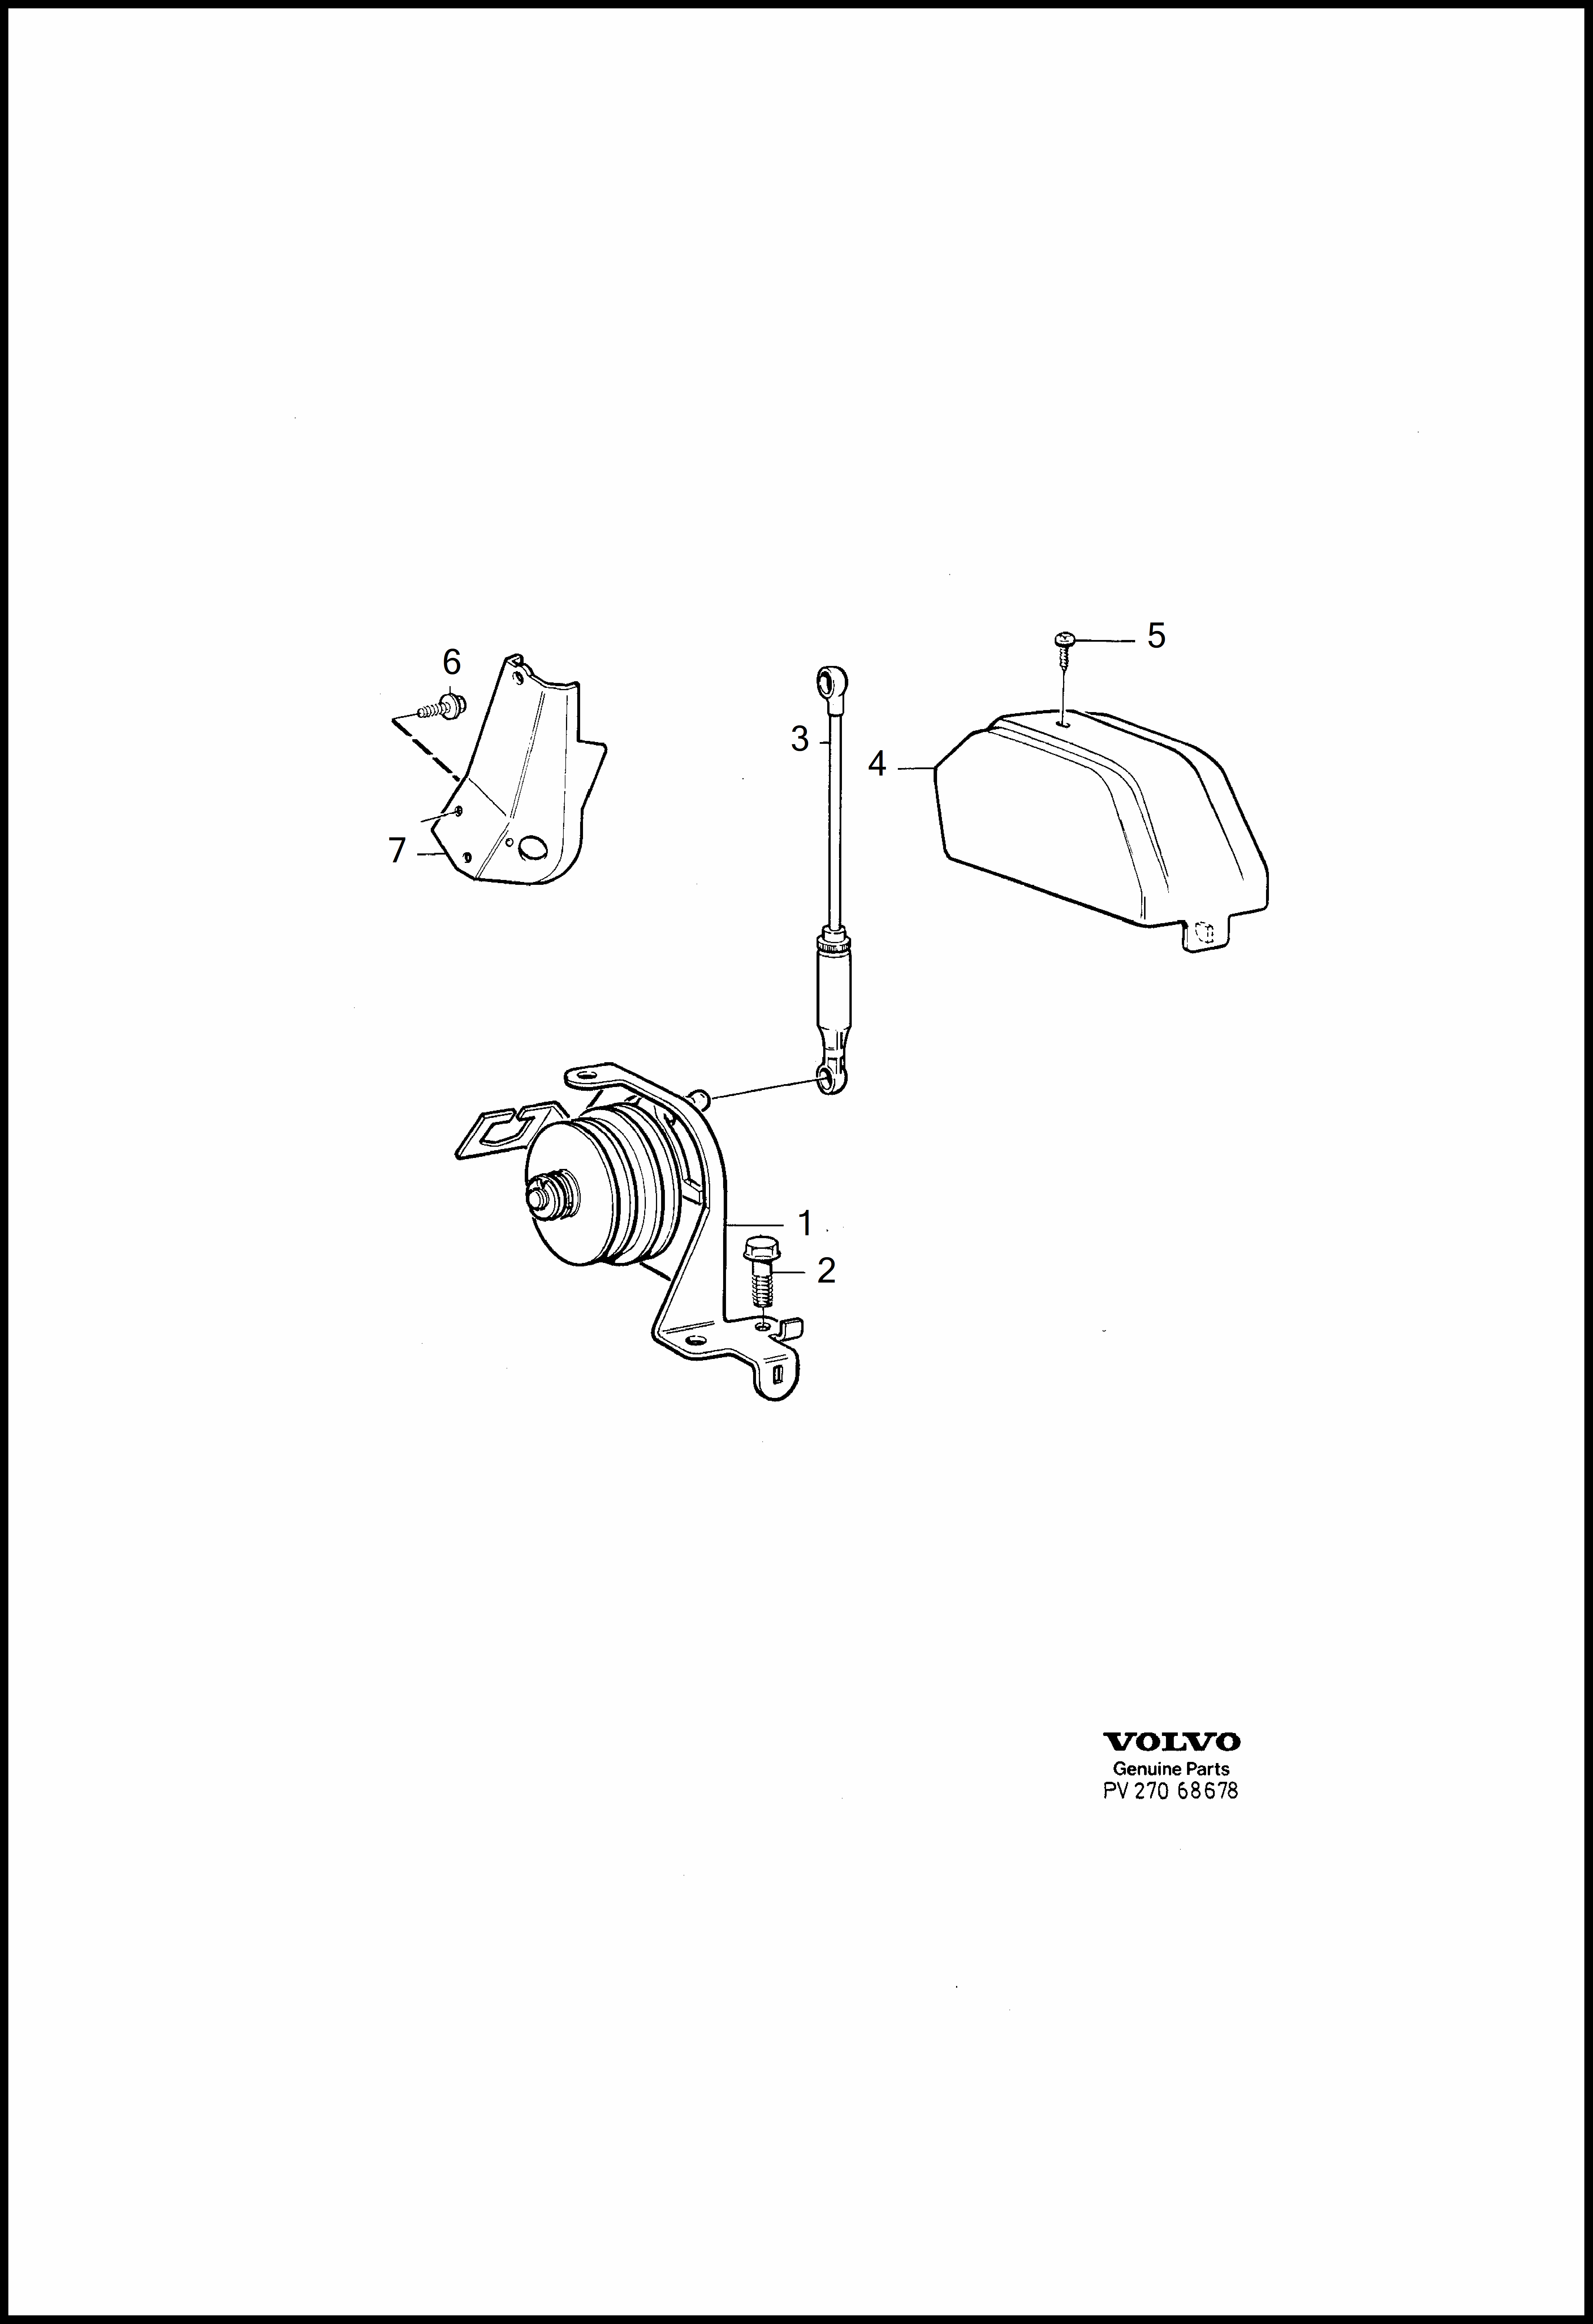 control pulley with fittings per Volvo 960 960